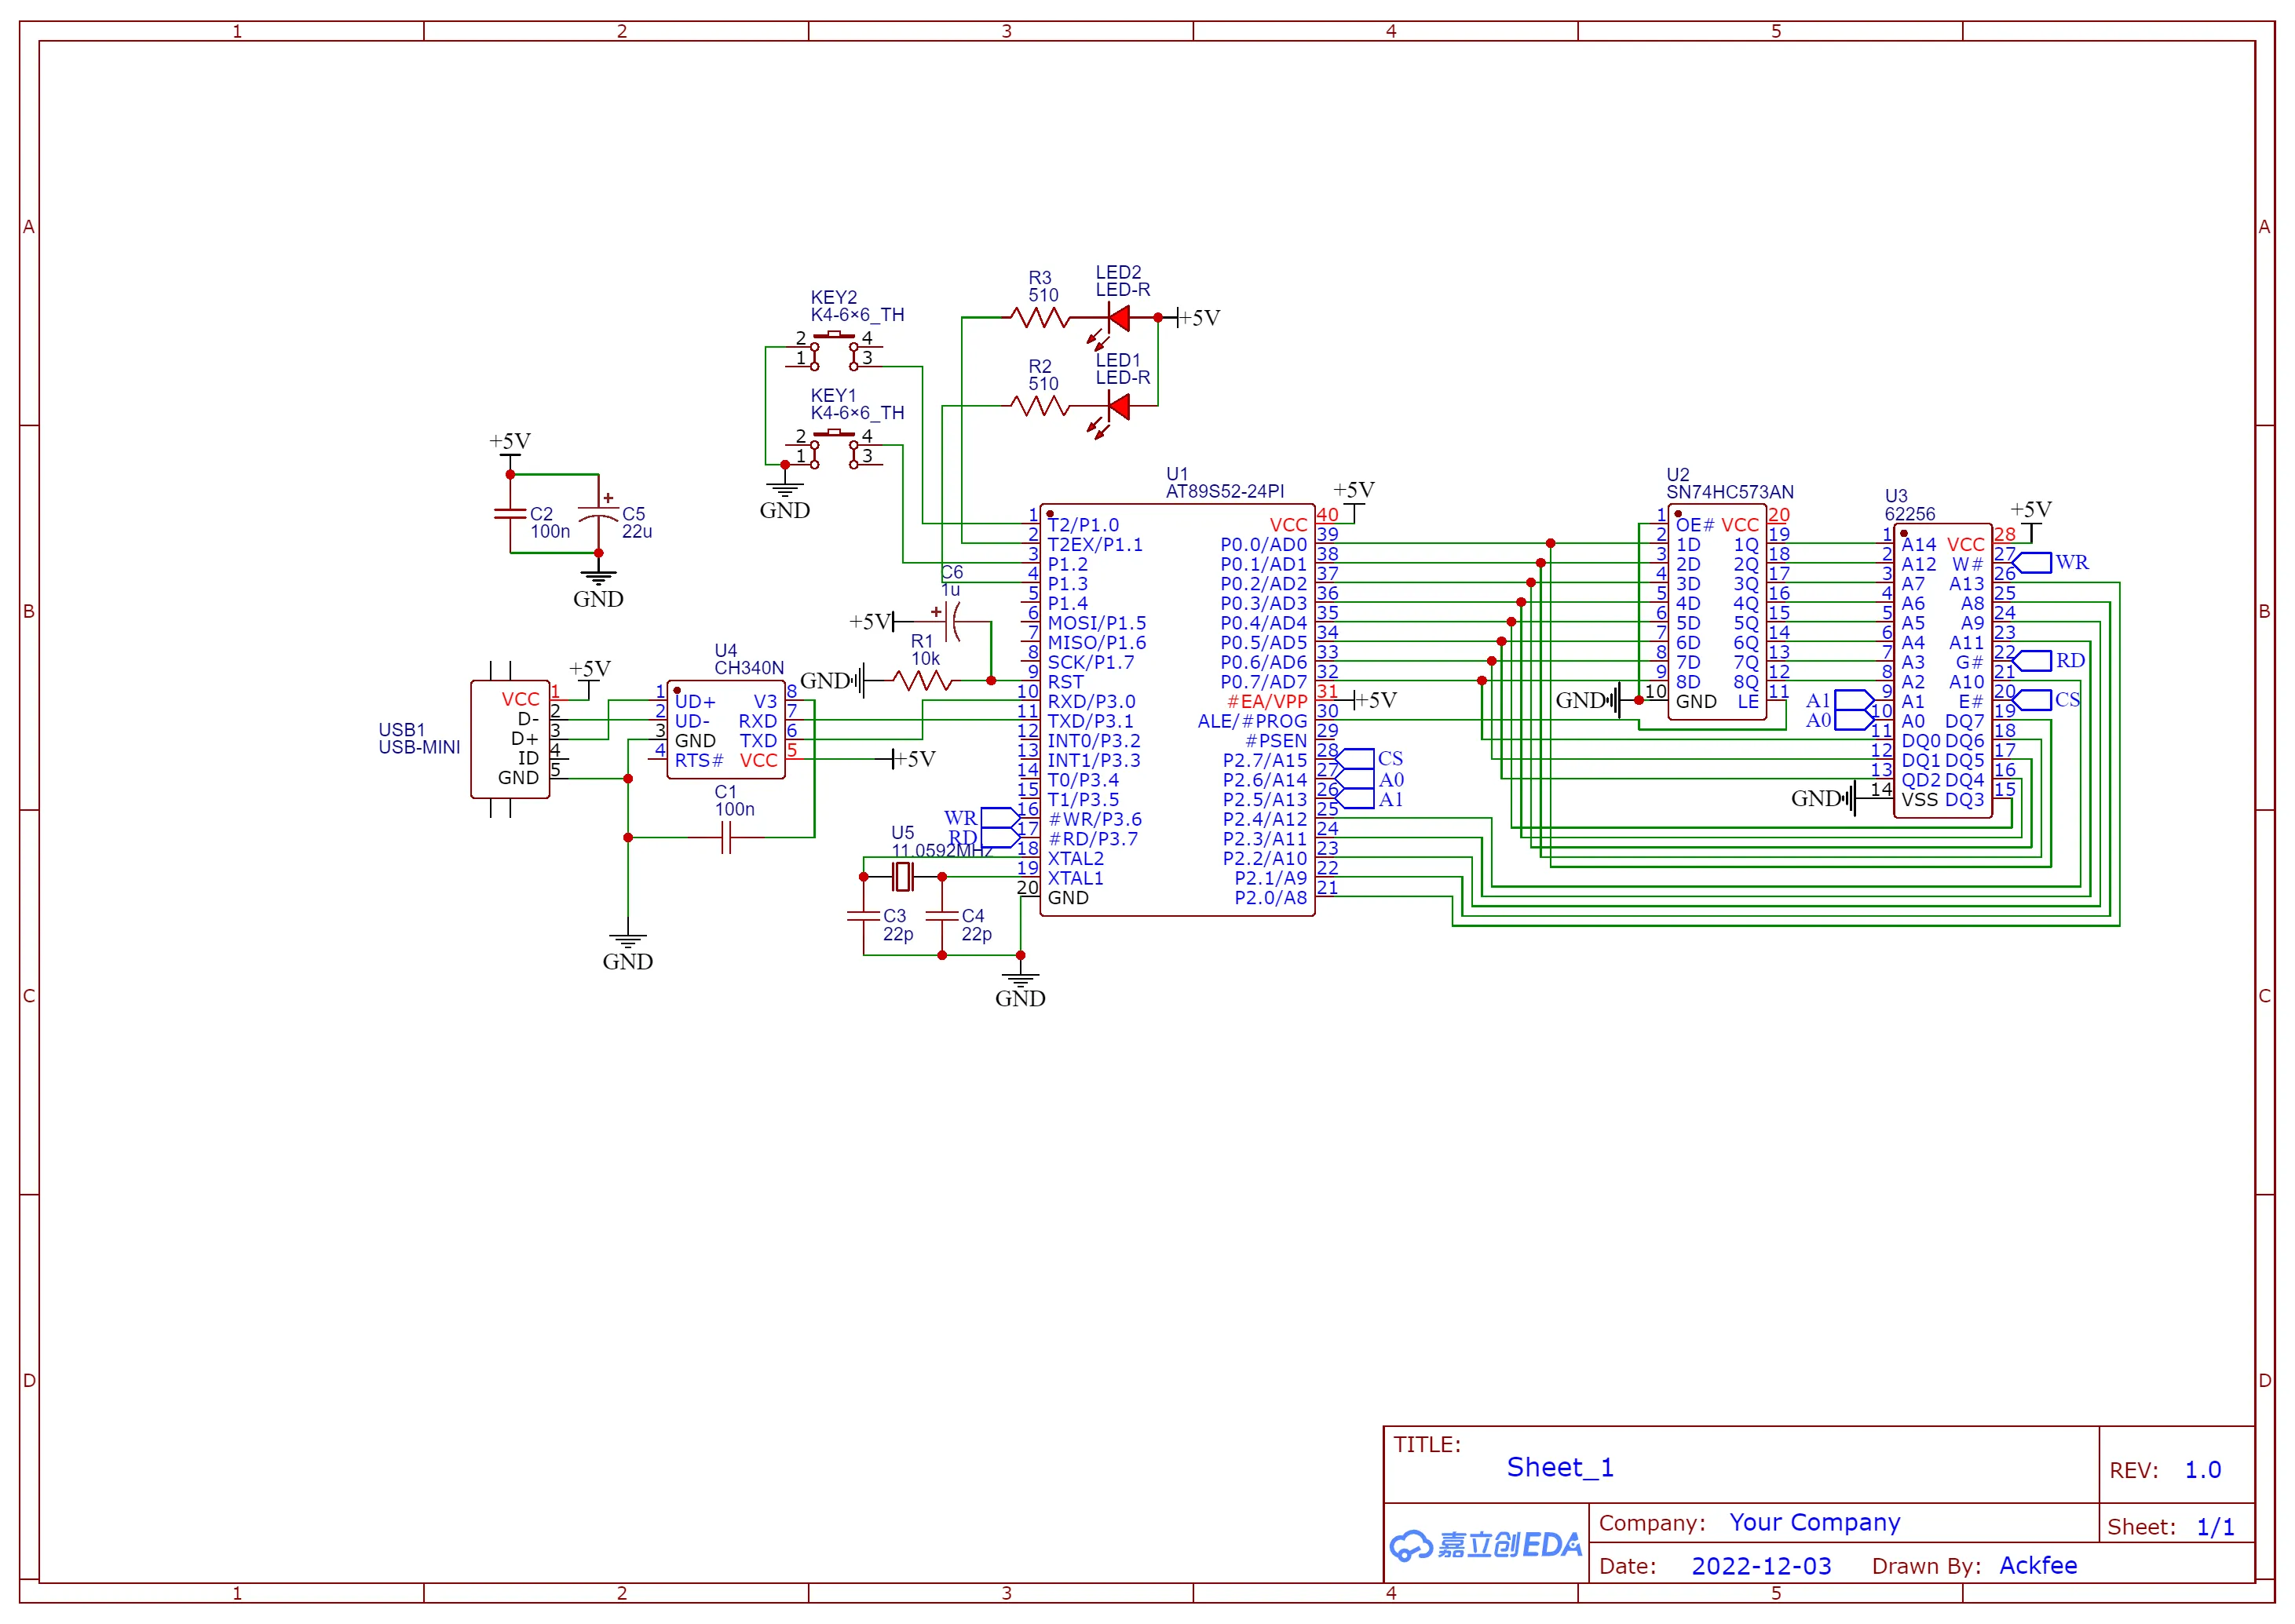 Schematic of the computer